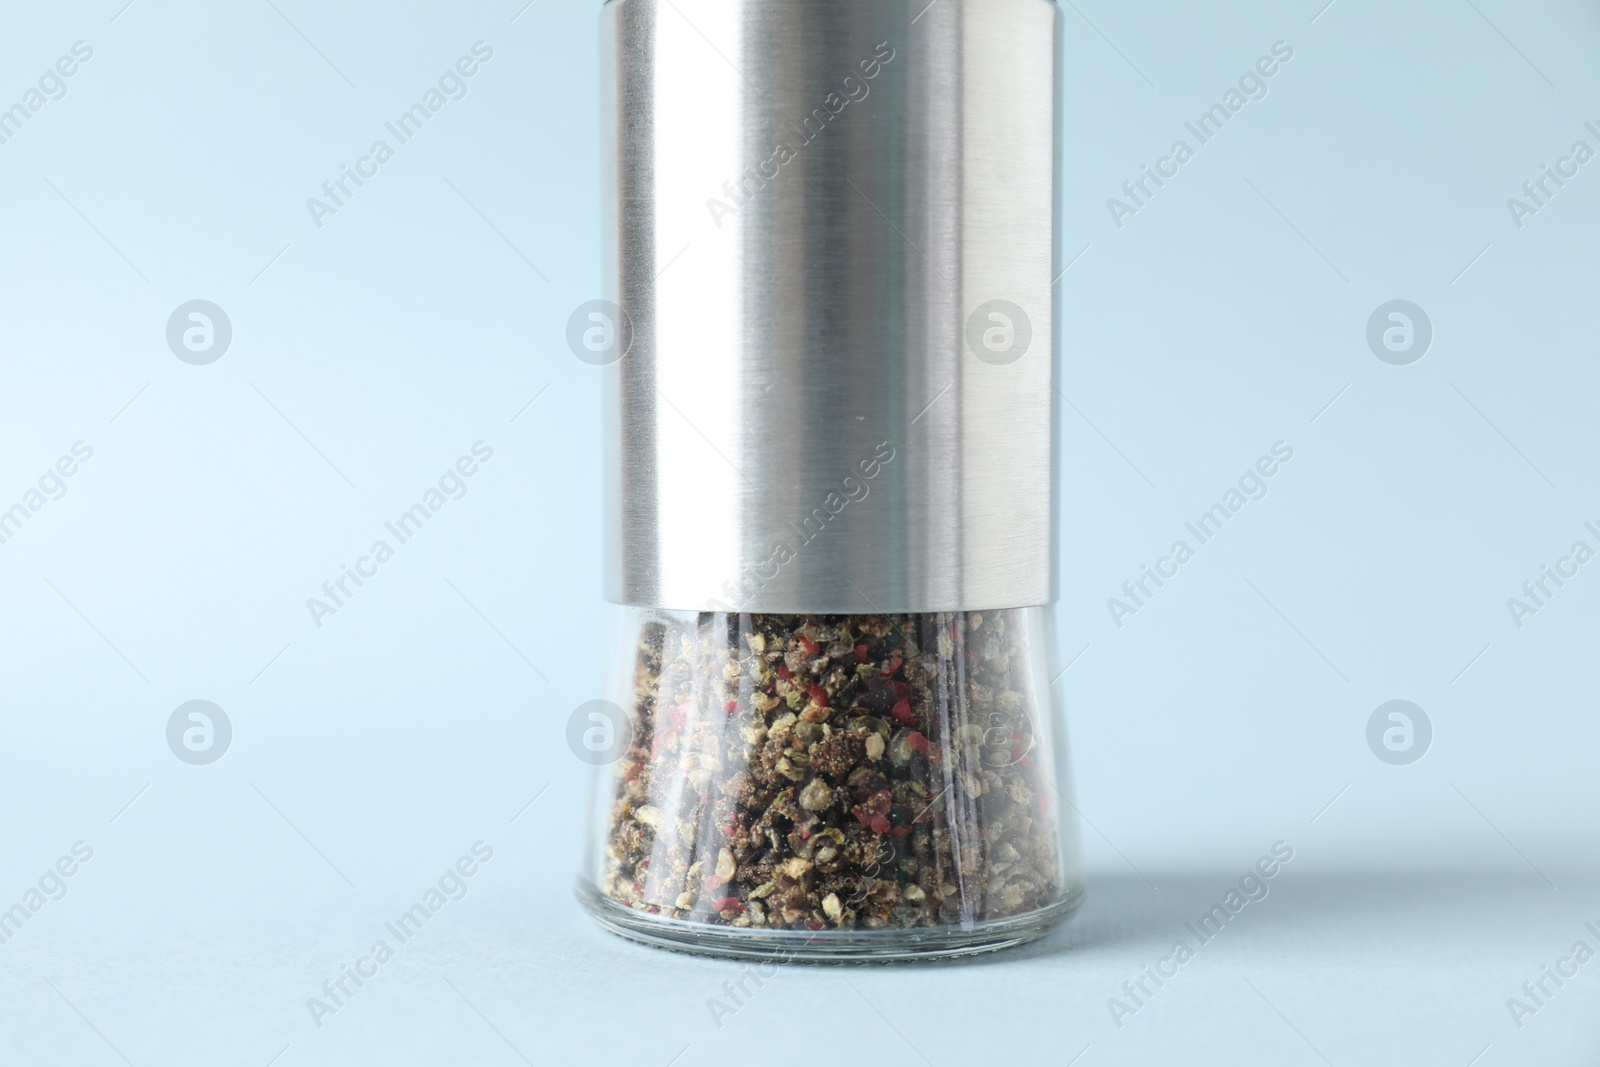 Photo of One pepper shaker on light background, closeup